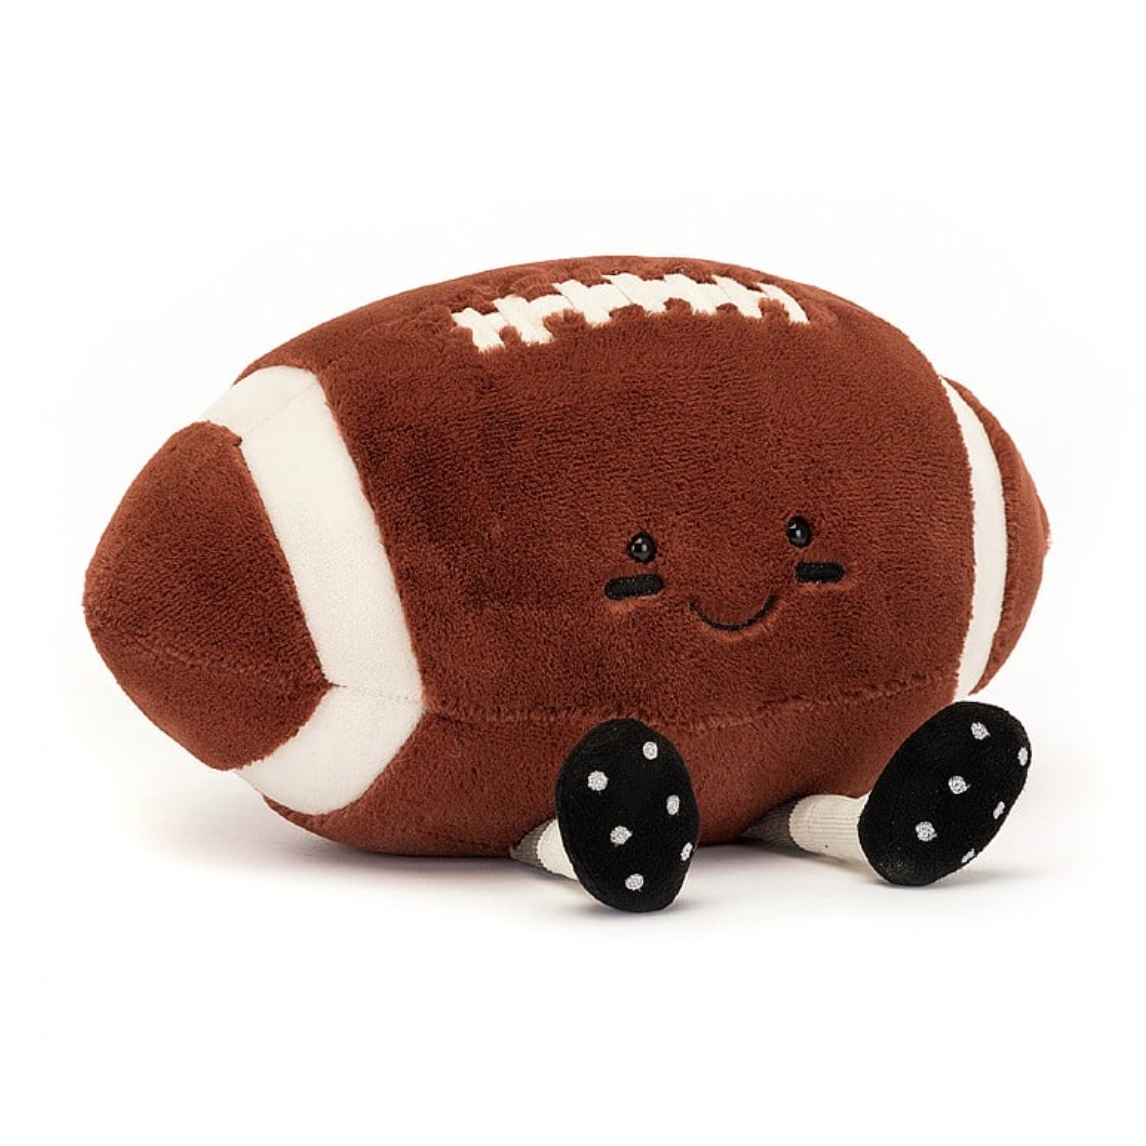 A plush toy styled like a smiling Amuseable Football with white stitching details and small, round black feet on a white background, from Jelly Cat Inc.